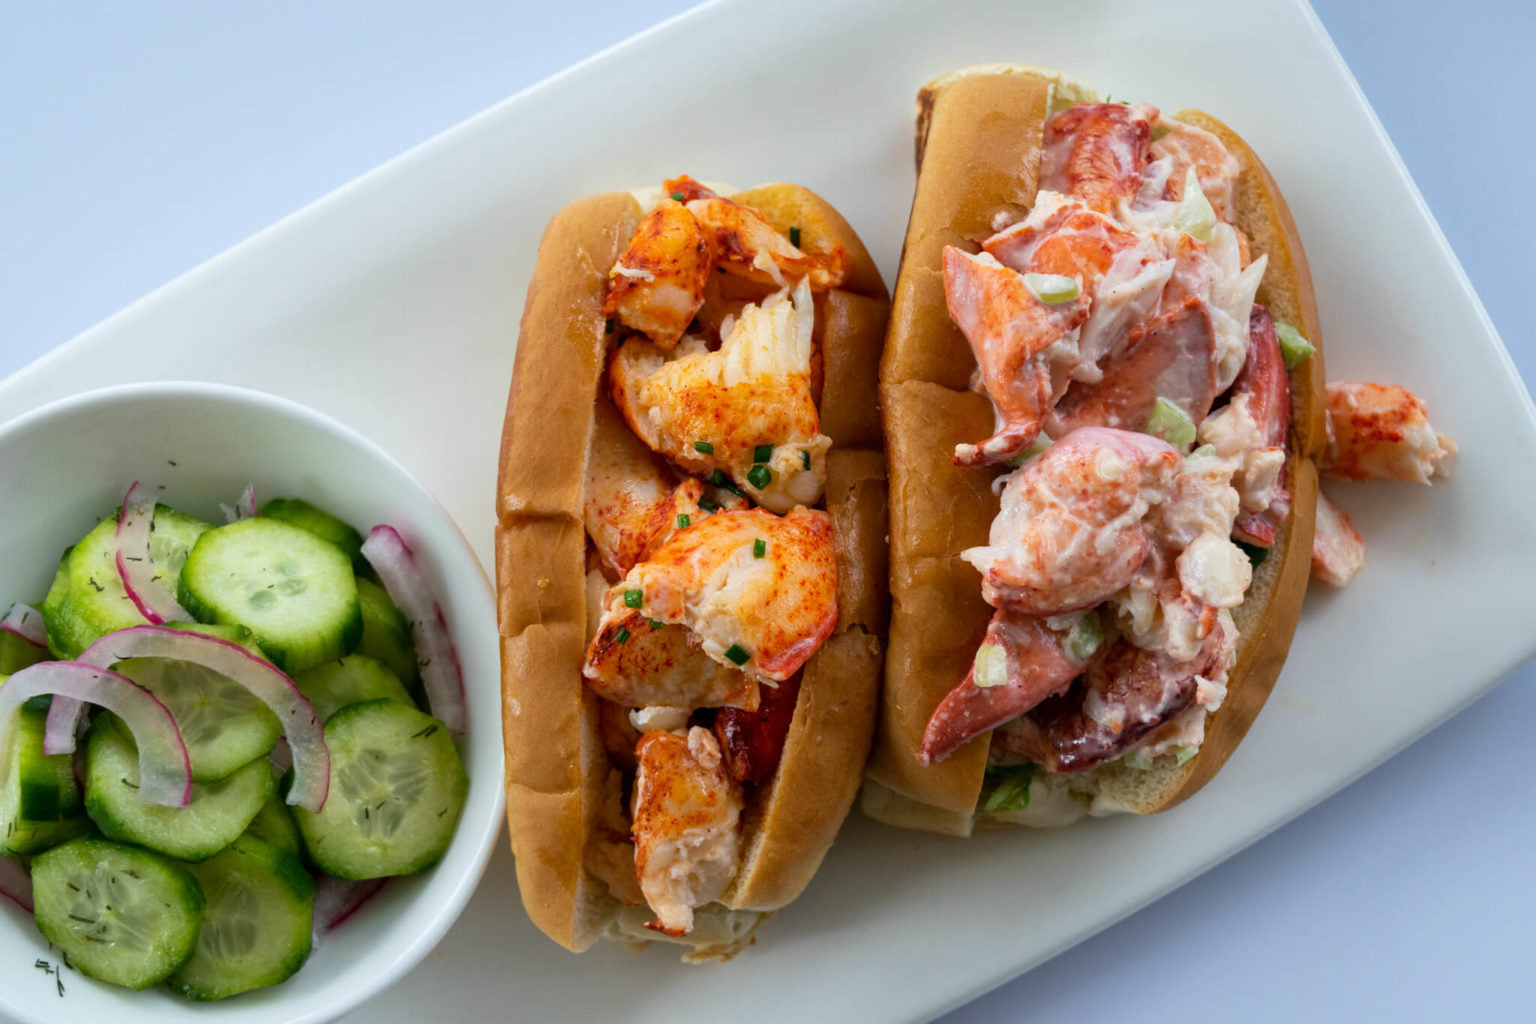 warm lobster roll with butter next to a cold lobster roll with mayonnaise on a white plate